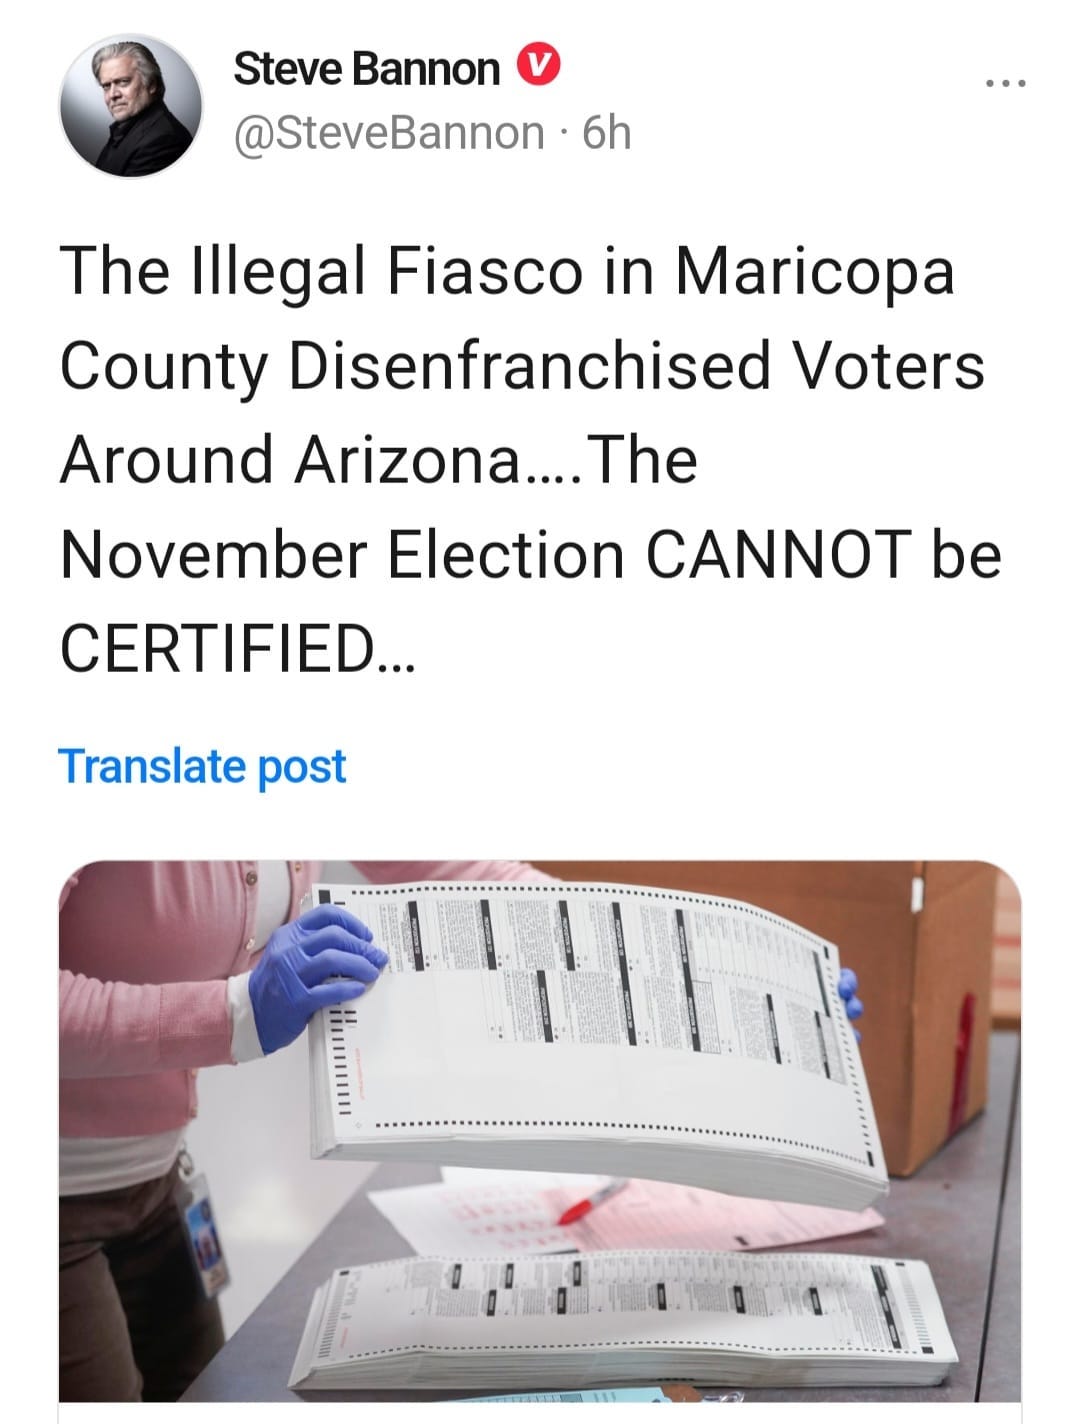 May be an image of 2 people and text that says 'Steve Bannon @SteveBannon .6h The Illegal Fiasco in Maricopa County Disenfranchised Voters Around Arizona.... November Election CANNOT be CERTIFIED... Translate post'